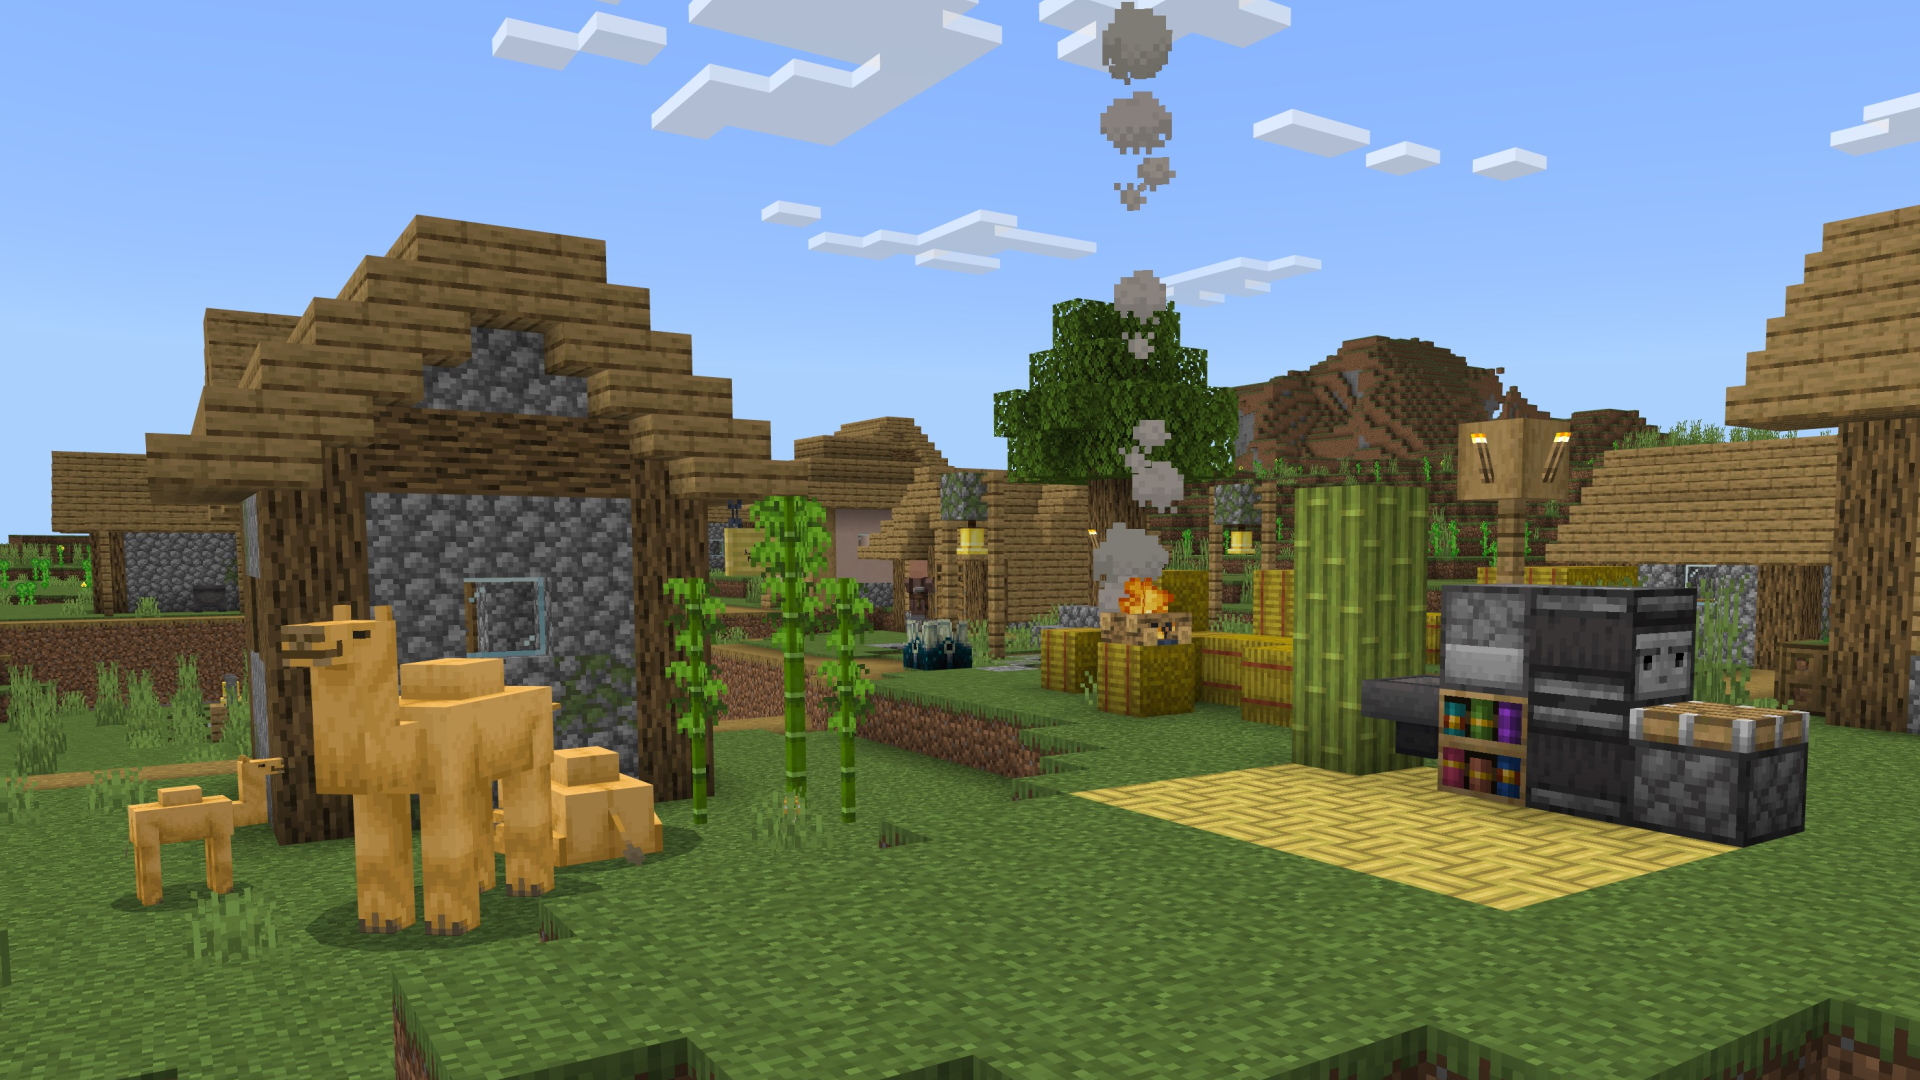 A Minecraft screenshot featuring chiseled bookshelves and camels.